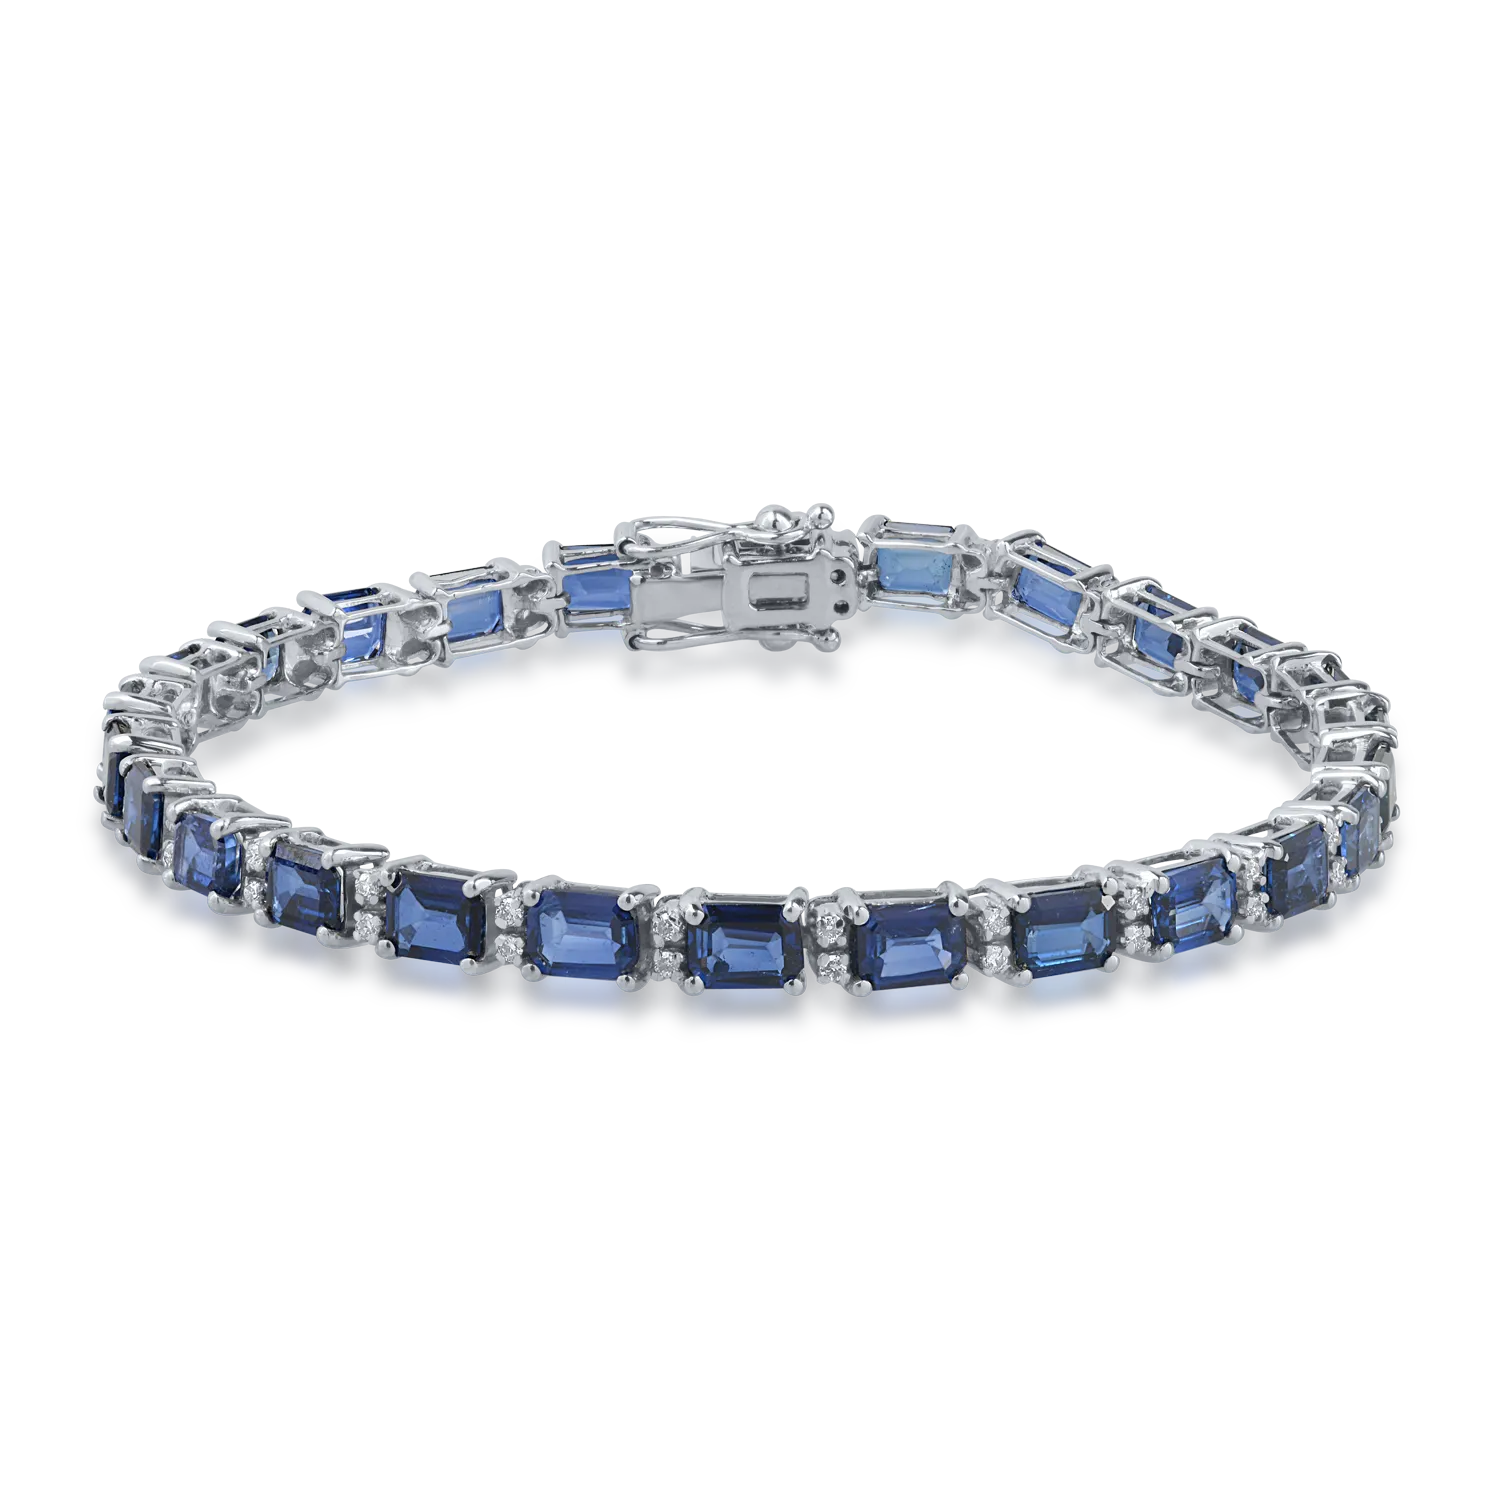 White gold tennis bracelet with 10.64ct sapphires and 0.41ct diamonds